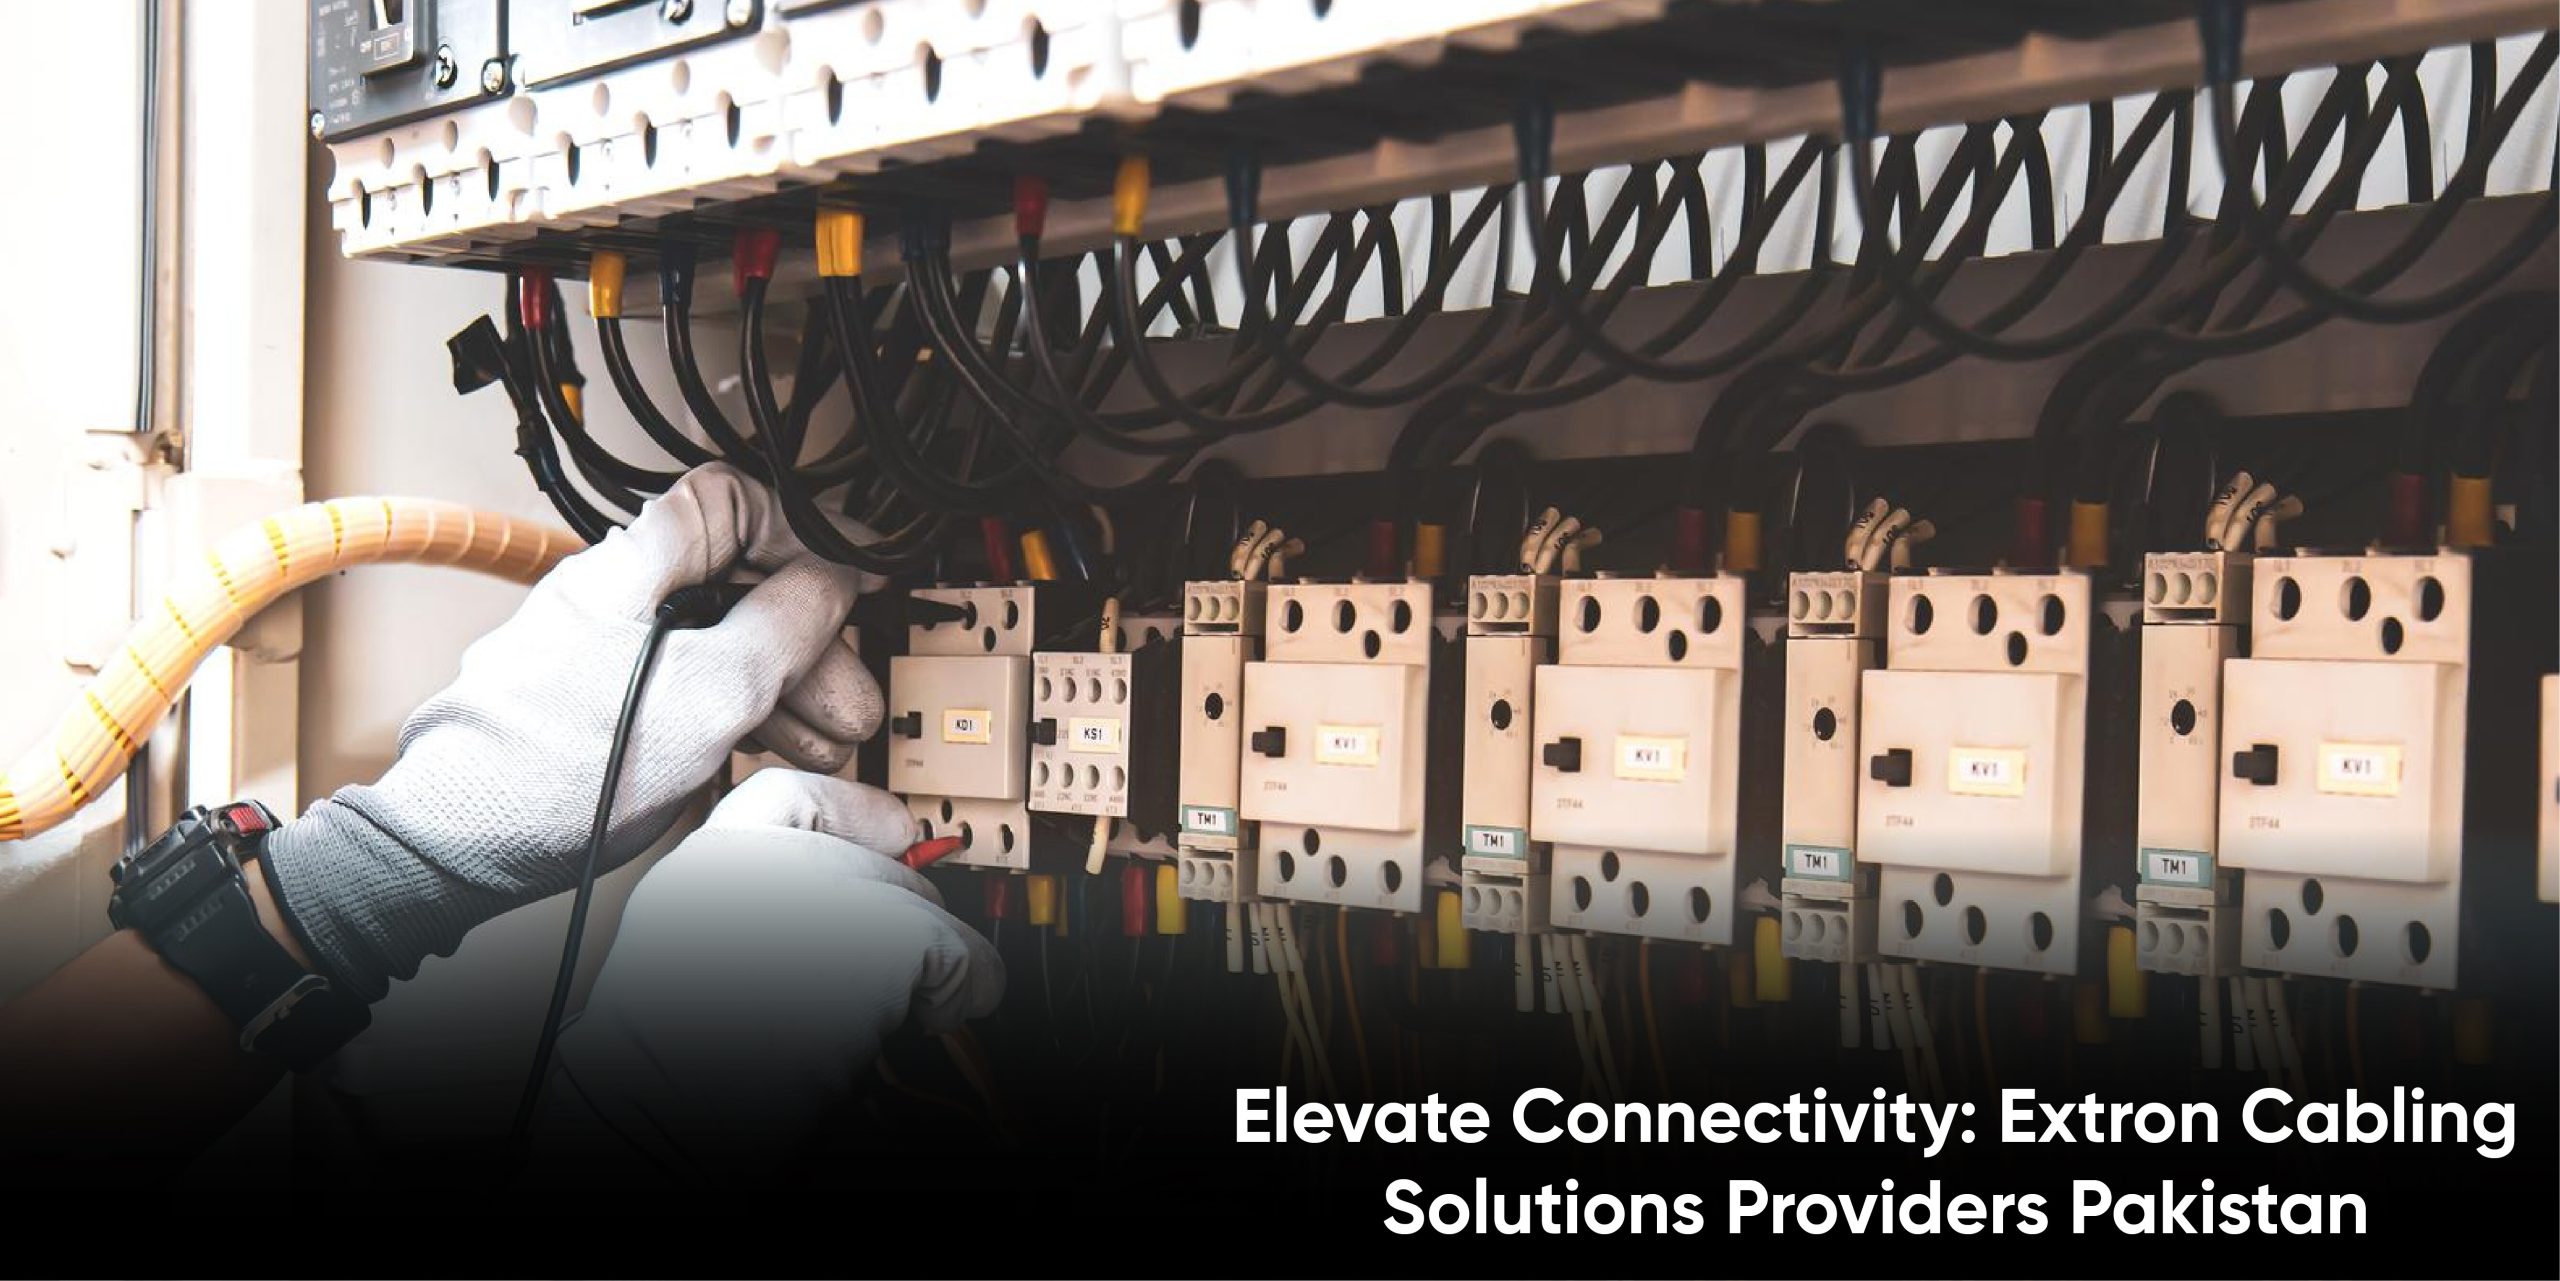 Extron cabling solutions providers in pakistan